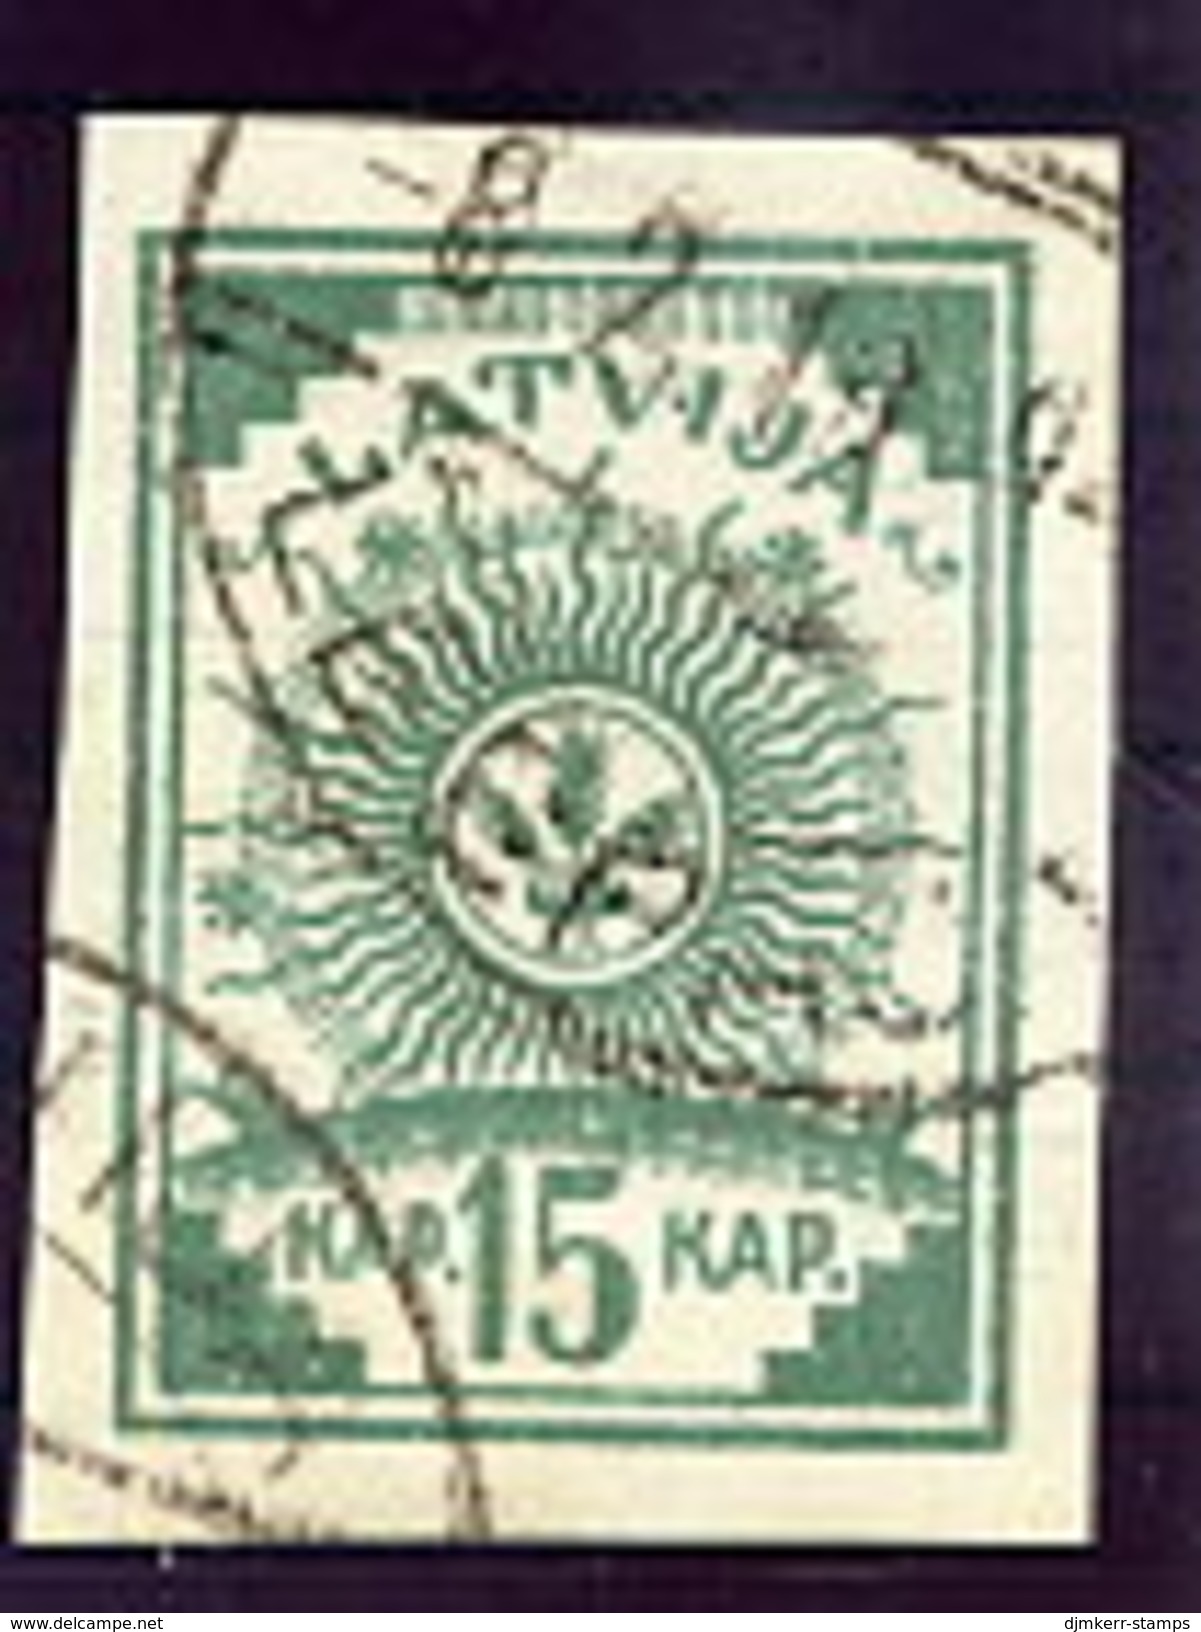 LATVIA 1919 Definitive 15 K. Green On Lined Paper Imperforate Used.  Michel 5Ba - Letonia